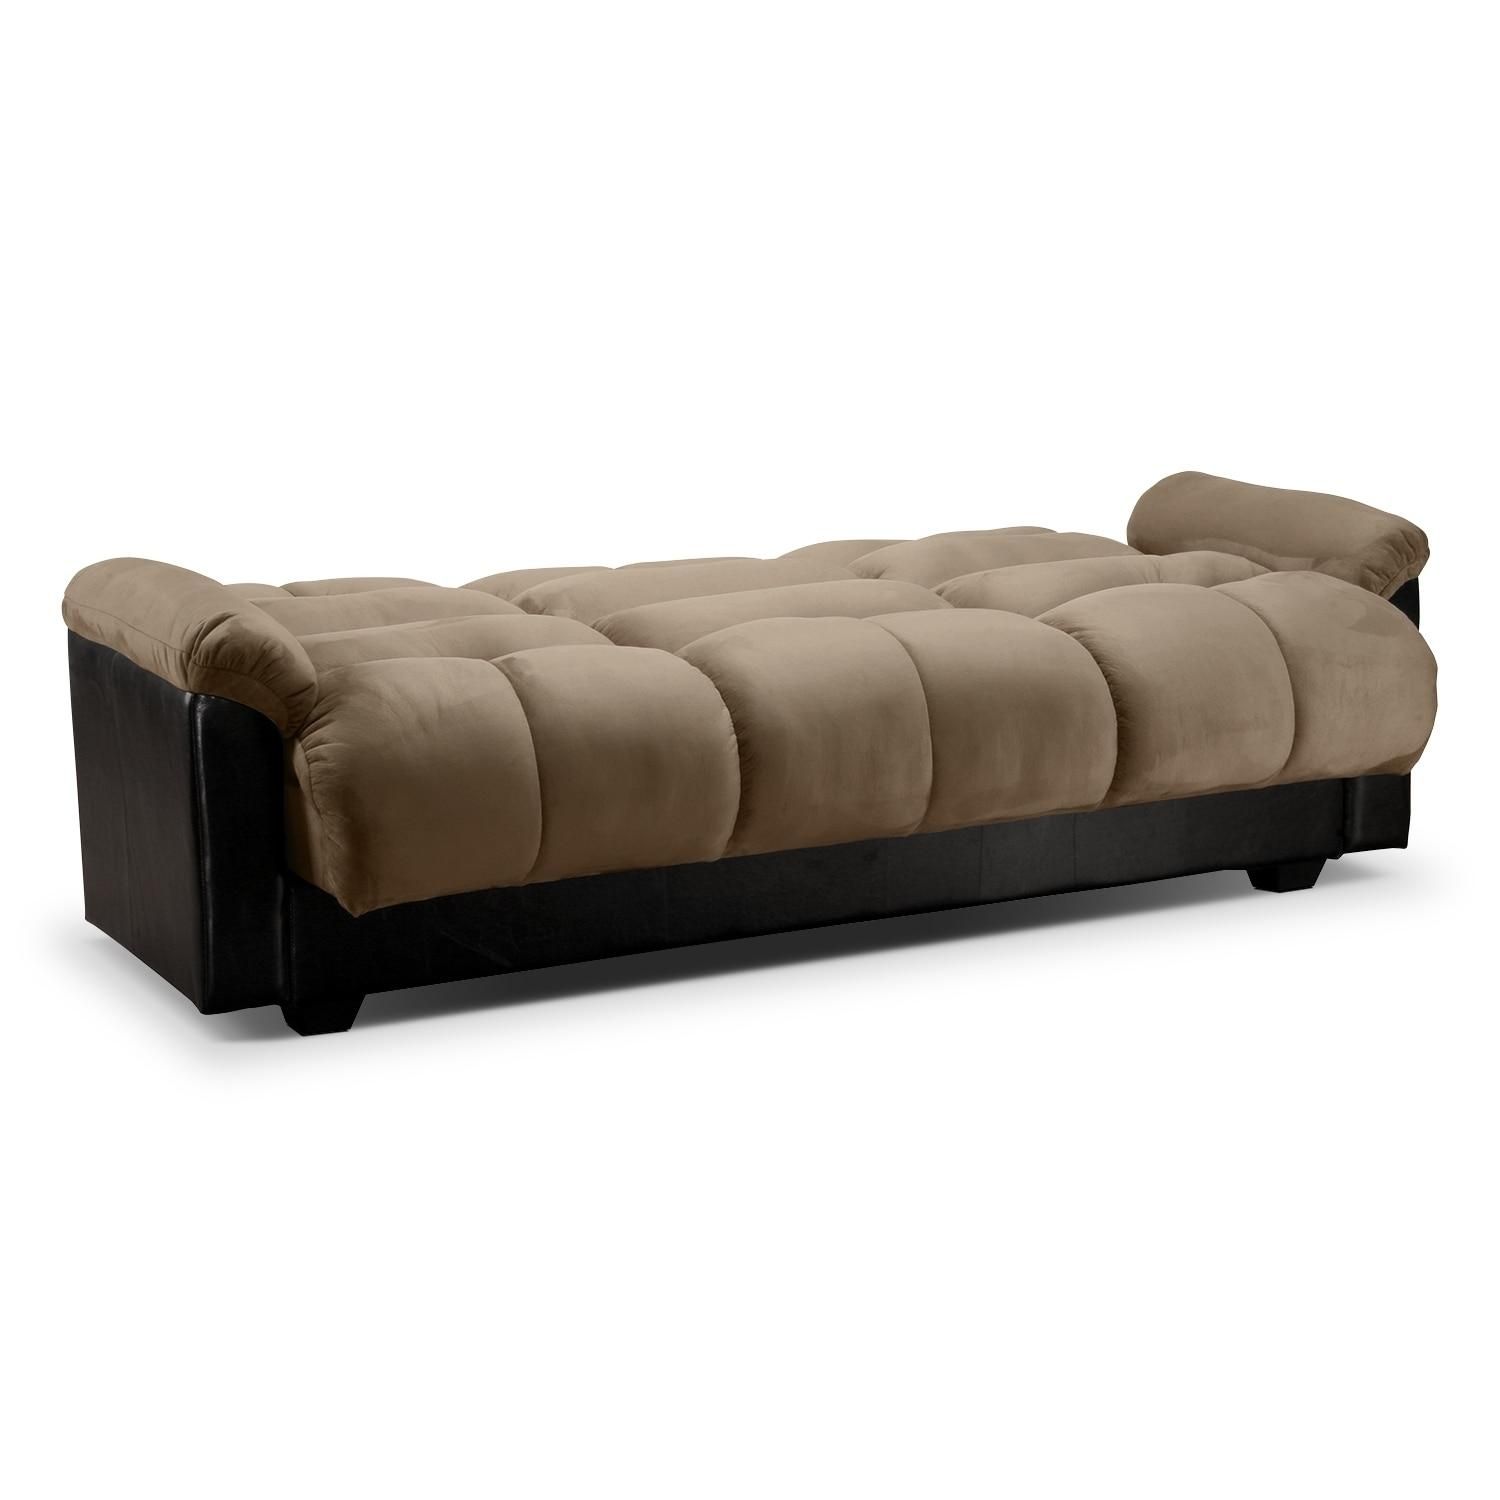 Ara Futon Sofa Bed With Storage – Hazelnut | Value City Furniture With Regard To Leather Sofa Beds With Storage (View 16 of 20)